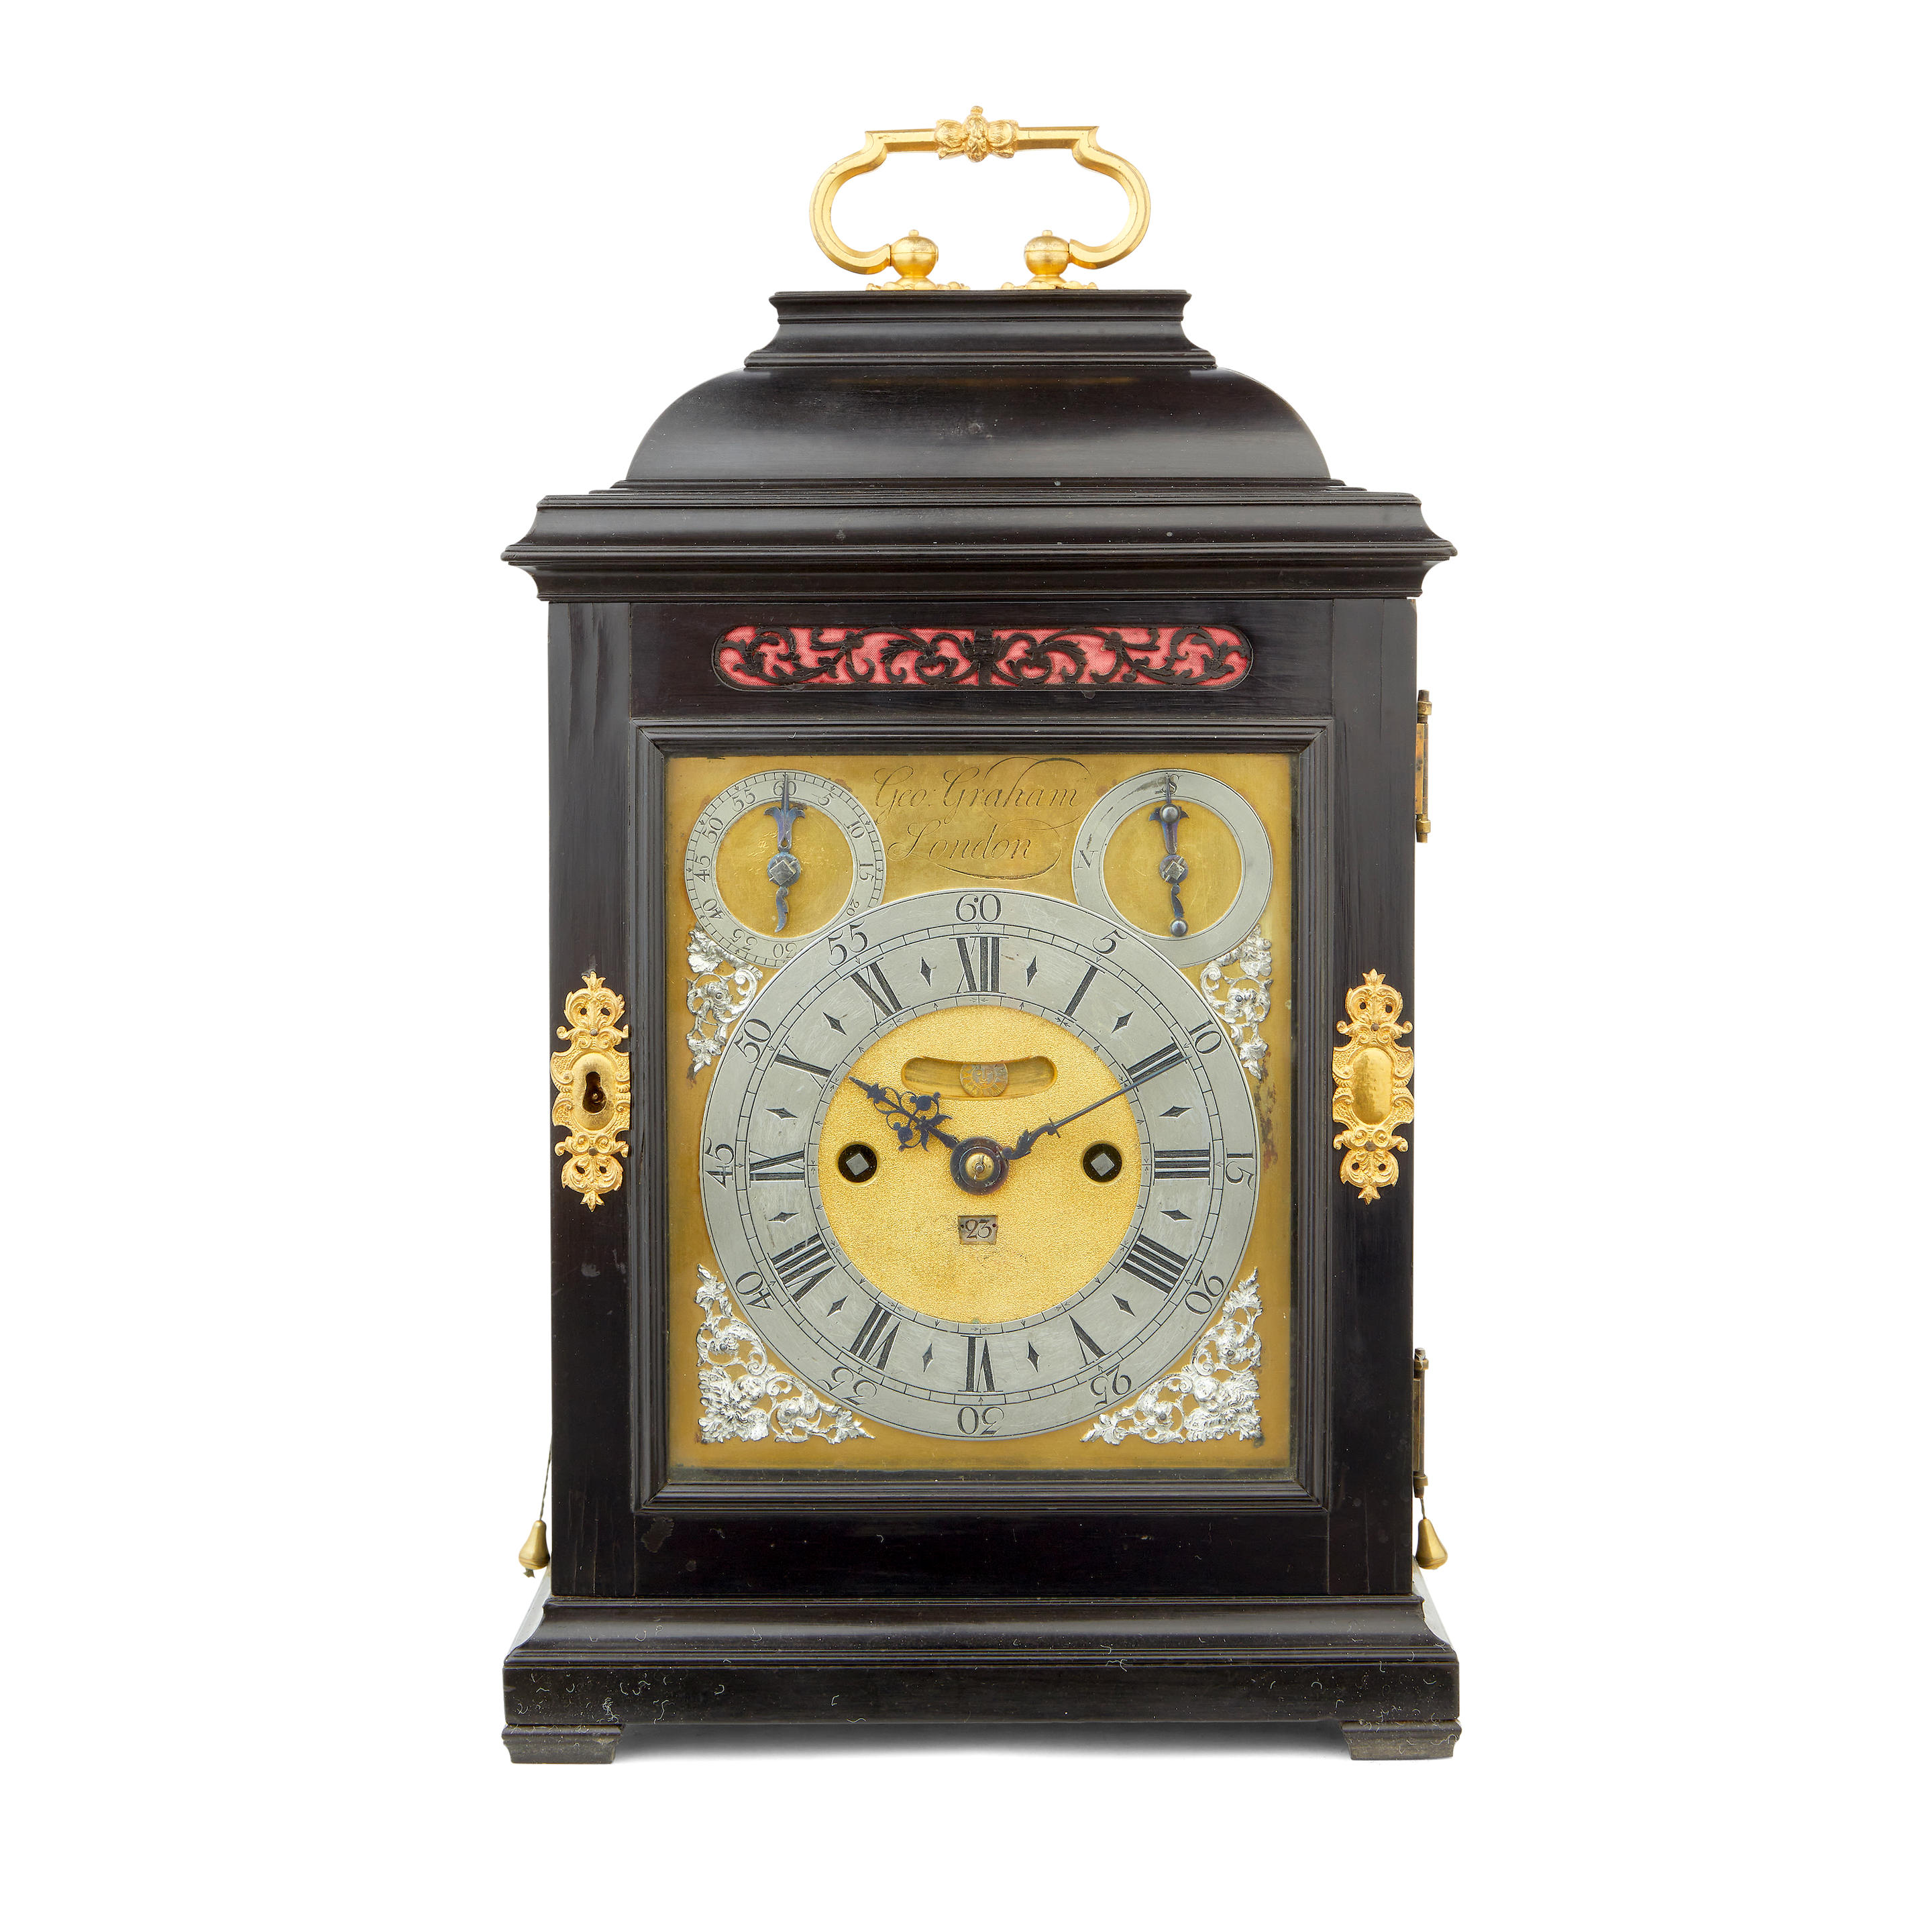 A fine first half of the 18th century silver-mounted ebony table clock with...